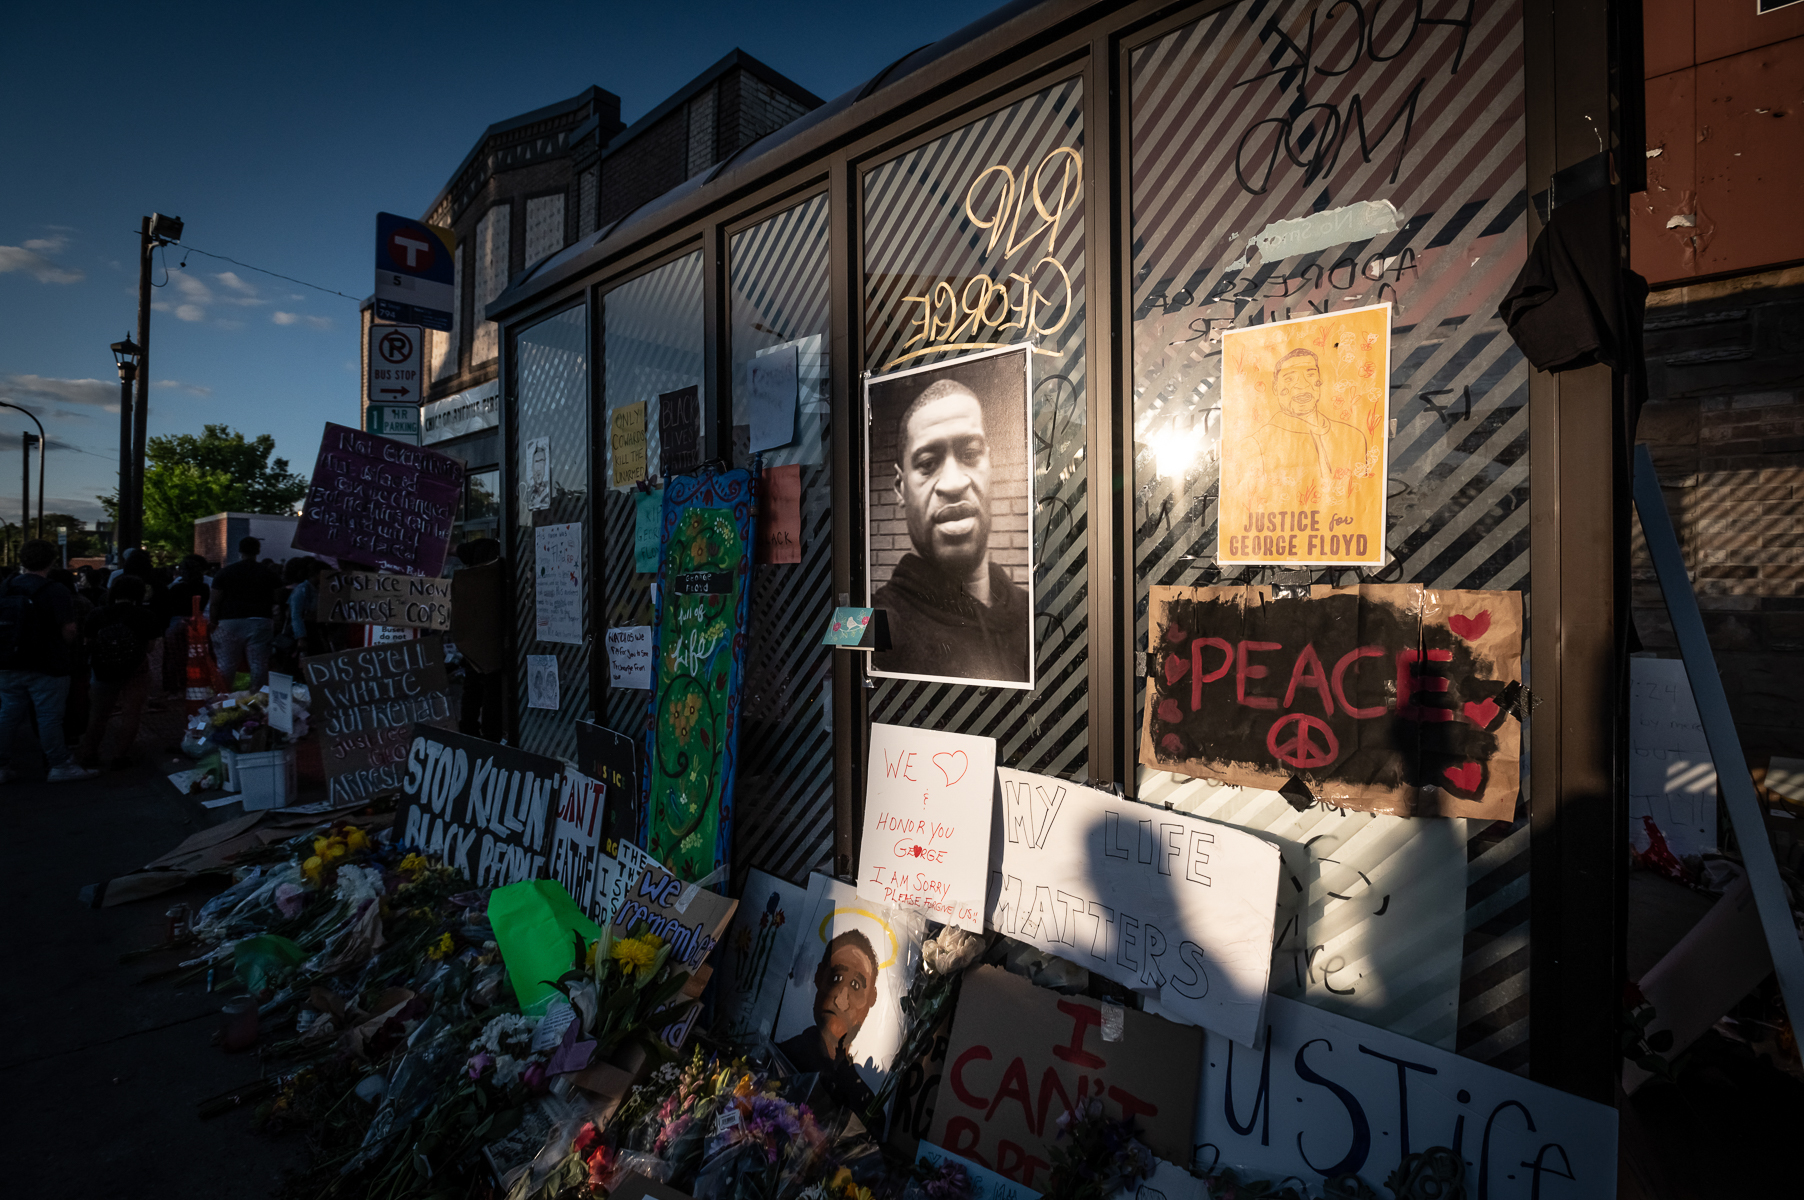 The sun sets as community members continue to gather at East 38th Street and Chicago Avenue, the site where George Floyd was killed by police on Friday, May 29, 2020 in Minneapolis, MN.